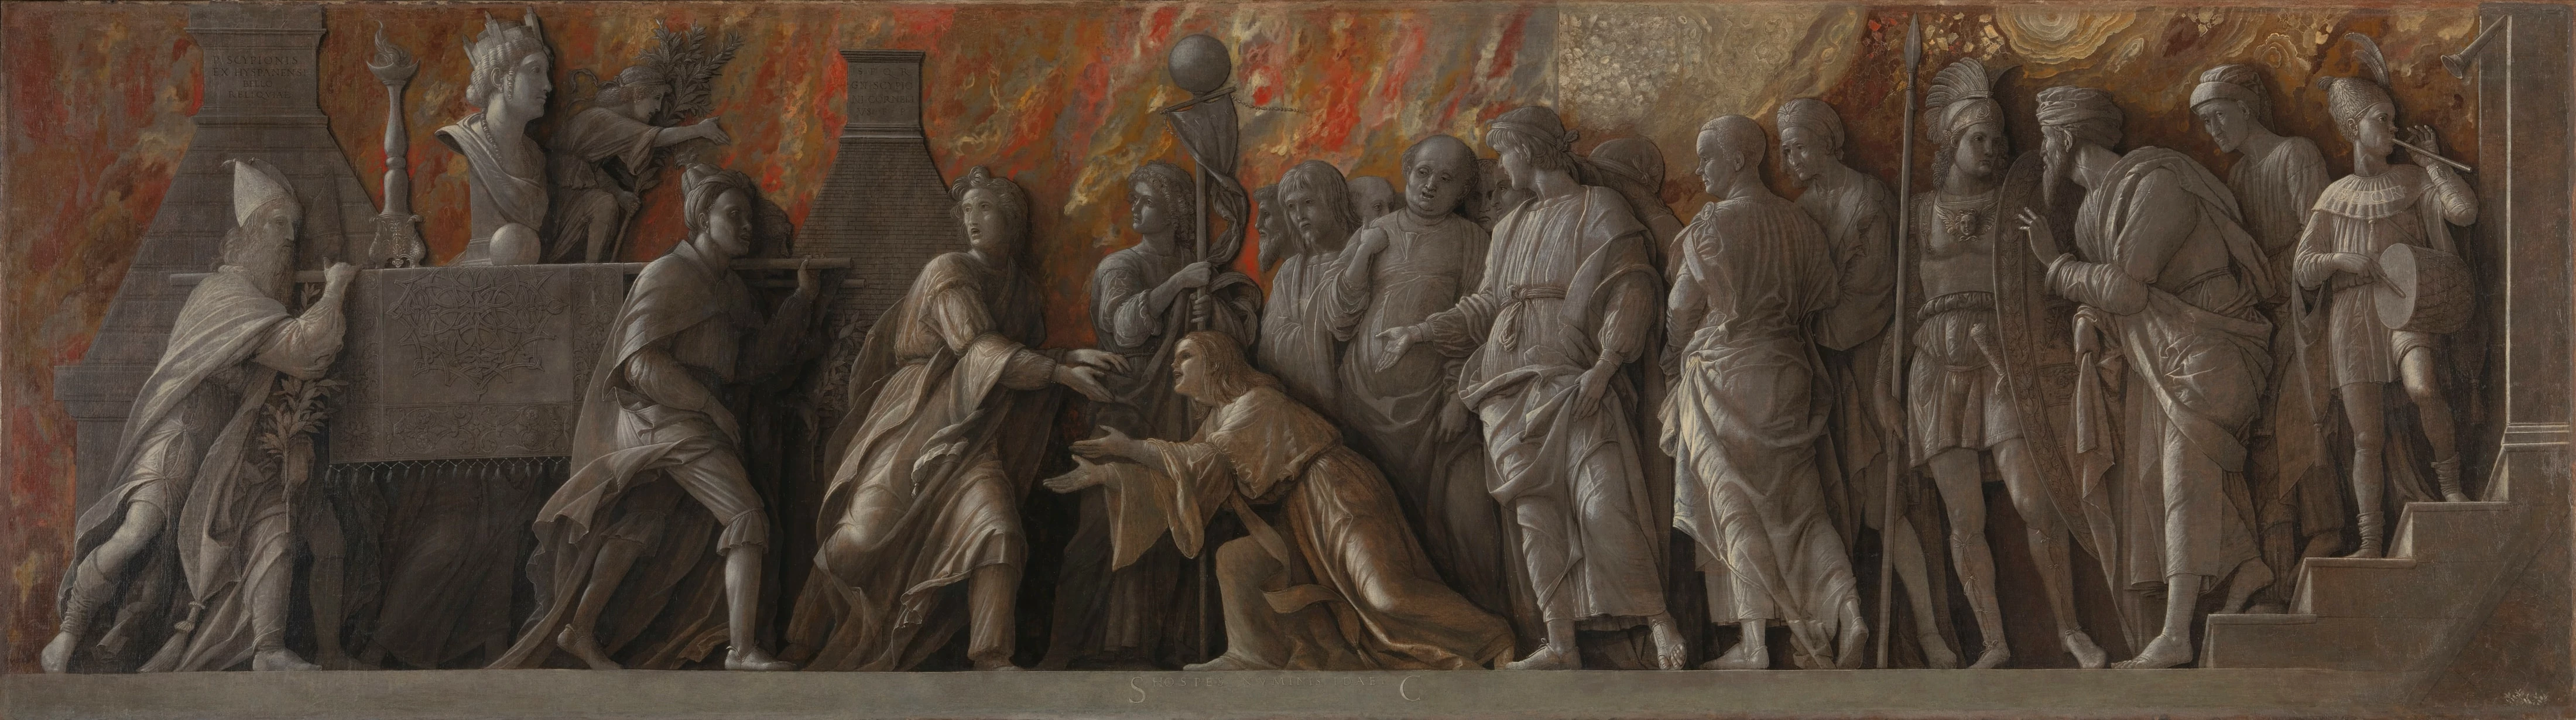 Introduction of the Cult of Cybele in Rome, Andrea Mantegna